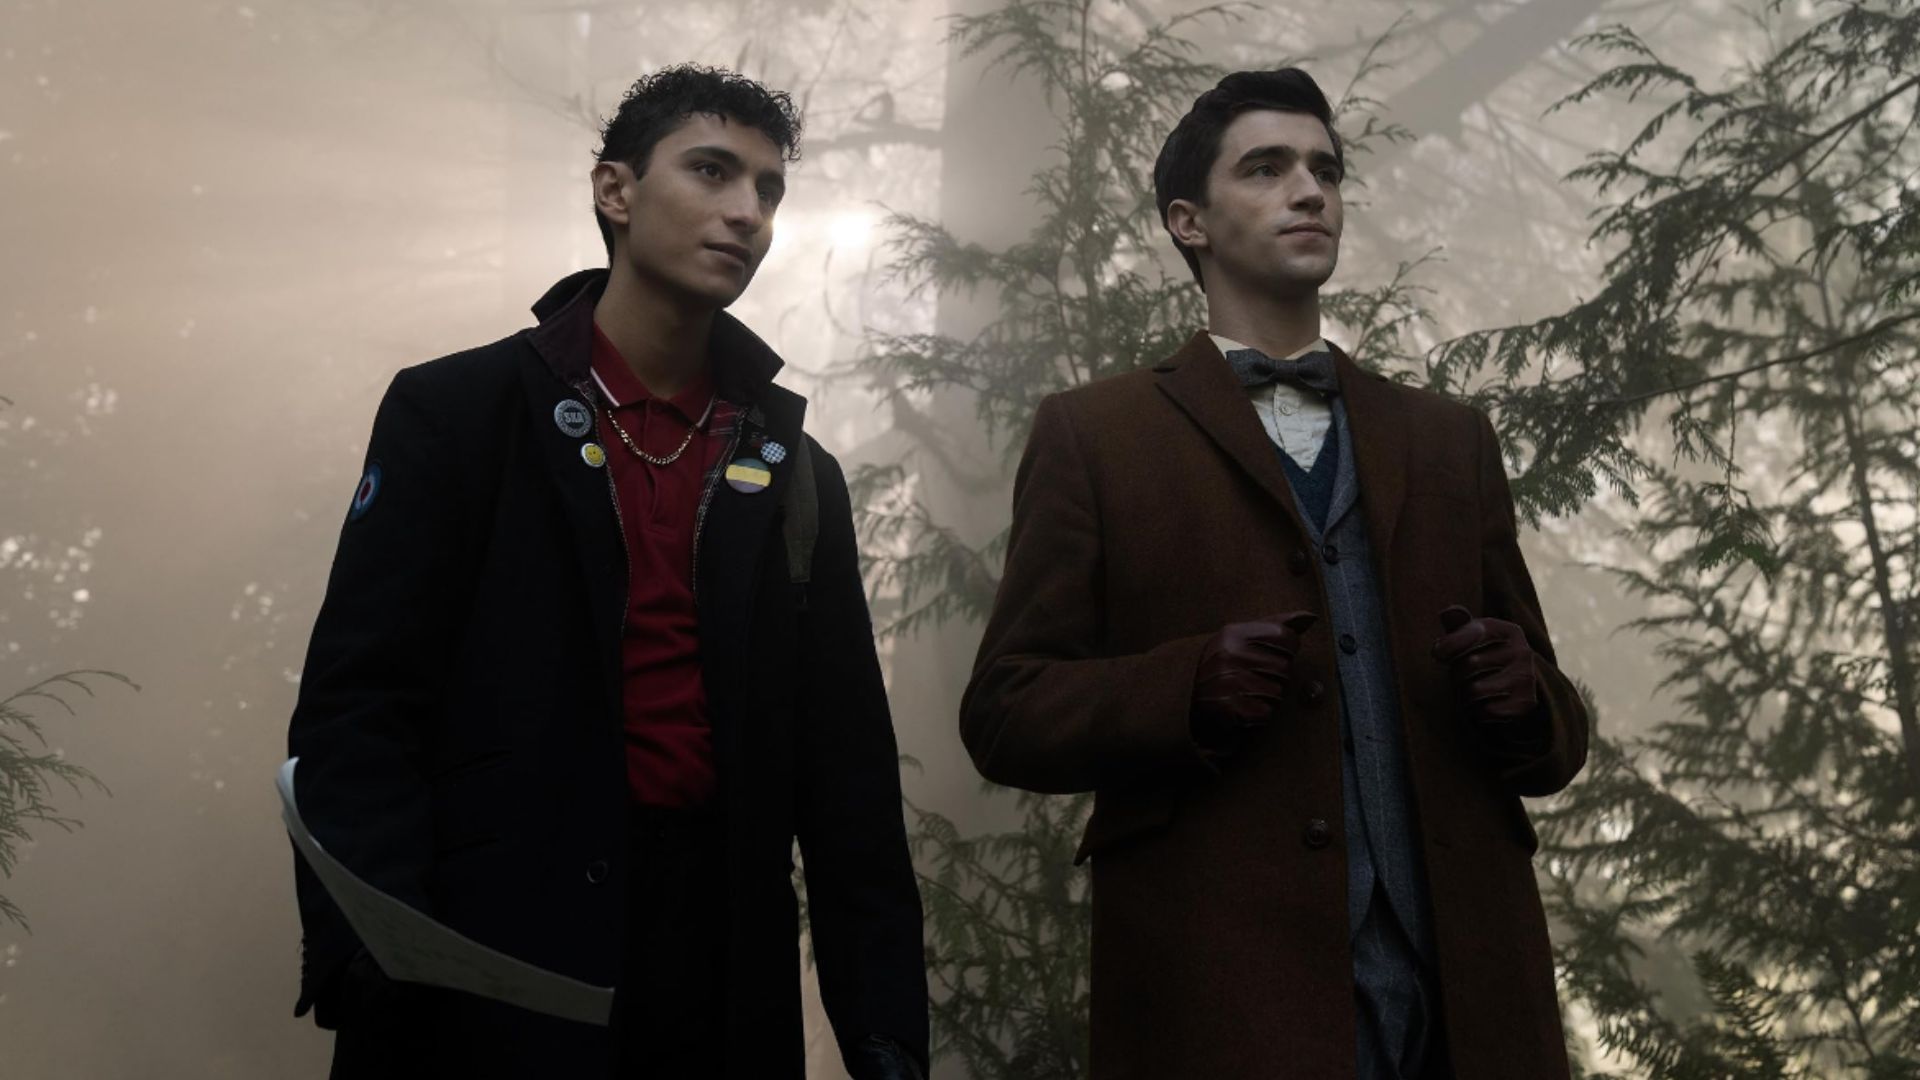 George Rextsrew and Jayden Revri as Charles and Edwin in Netflix's Dead Boy Detectives